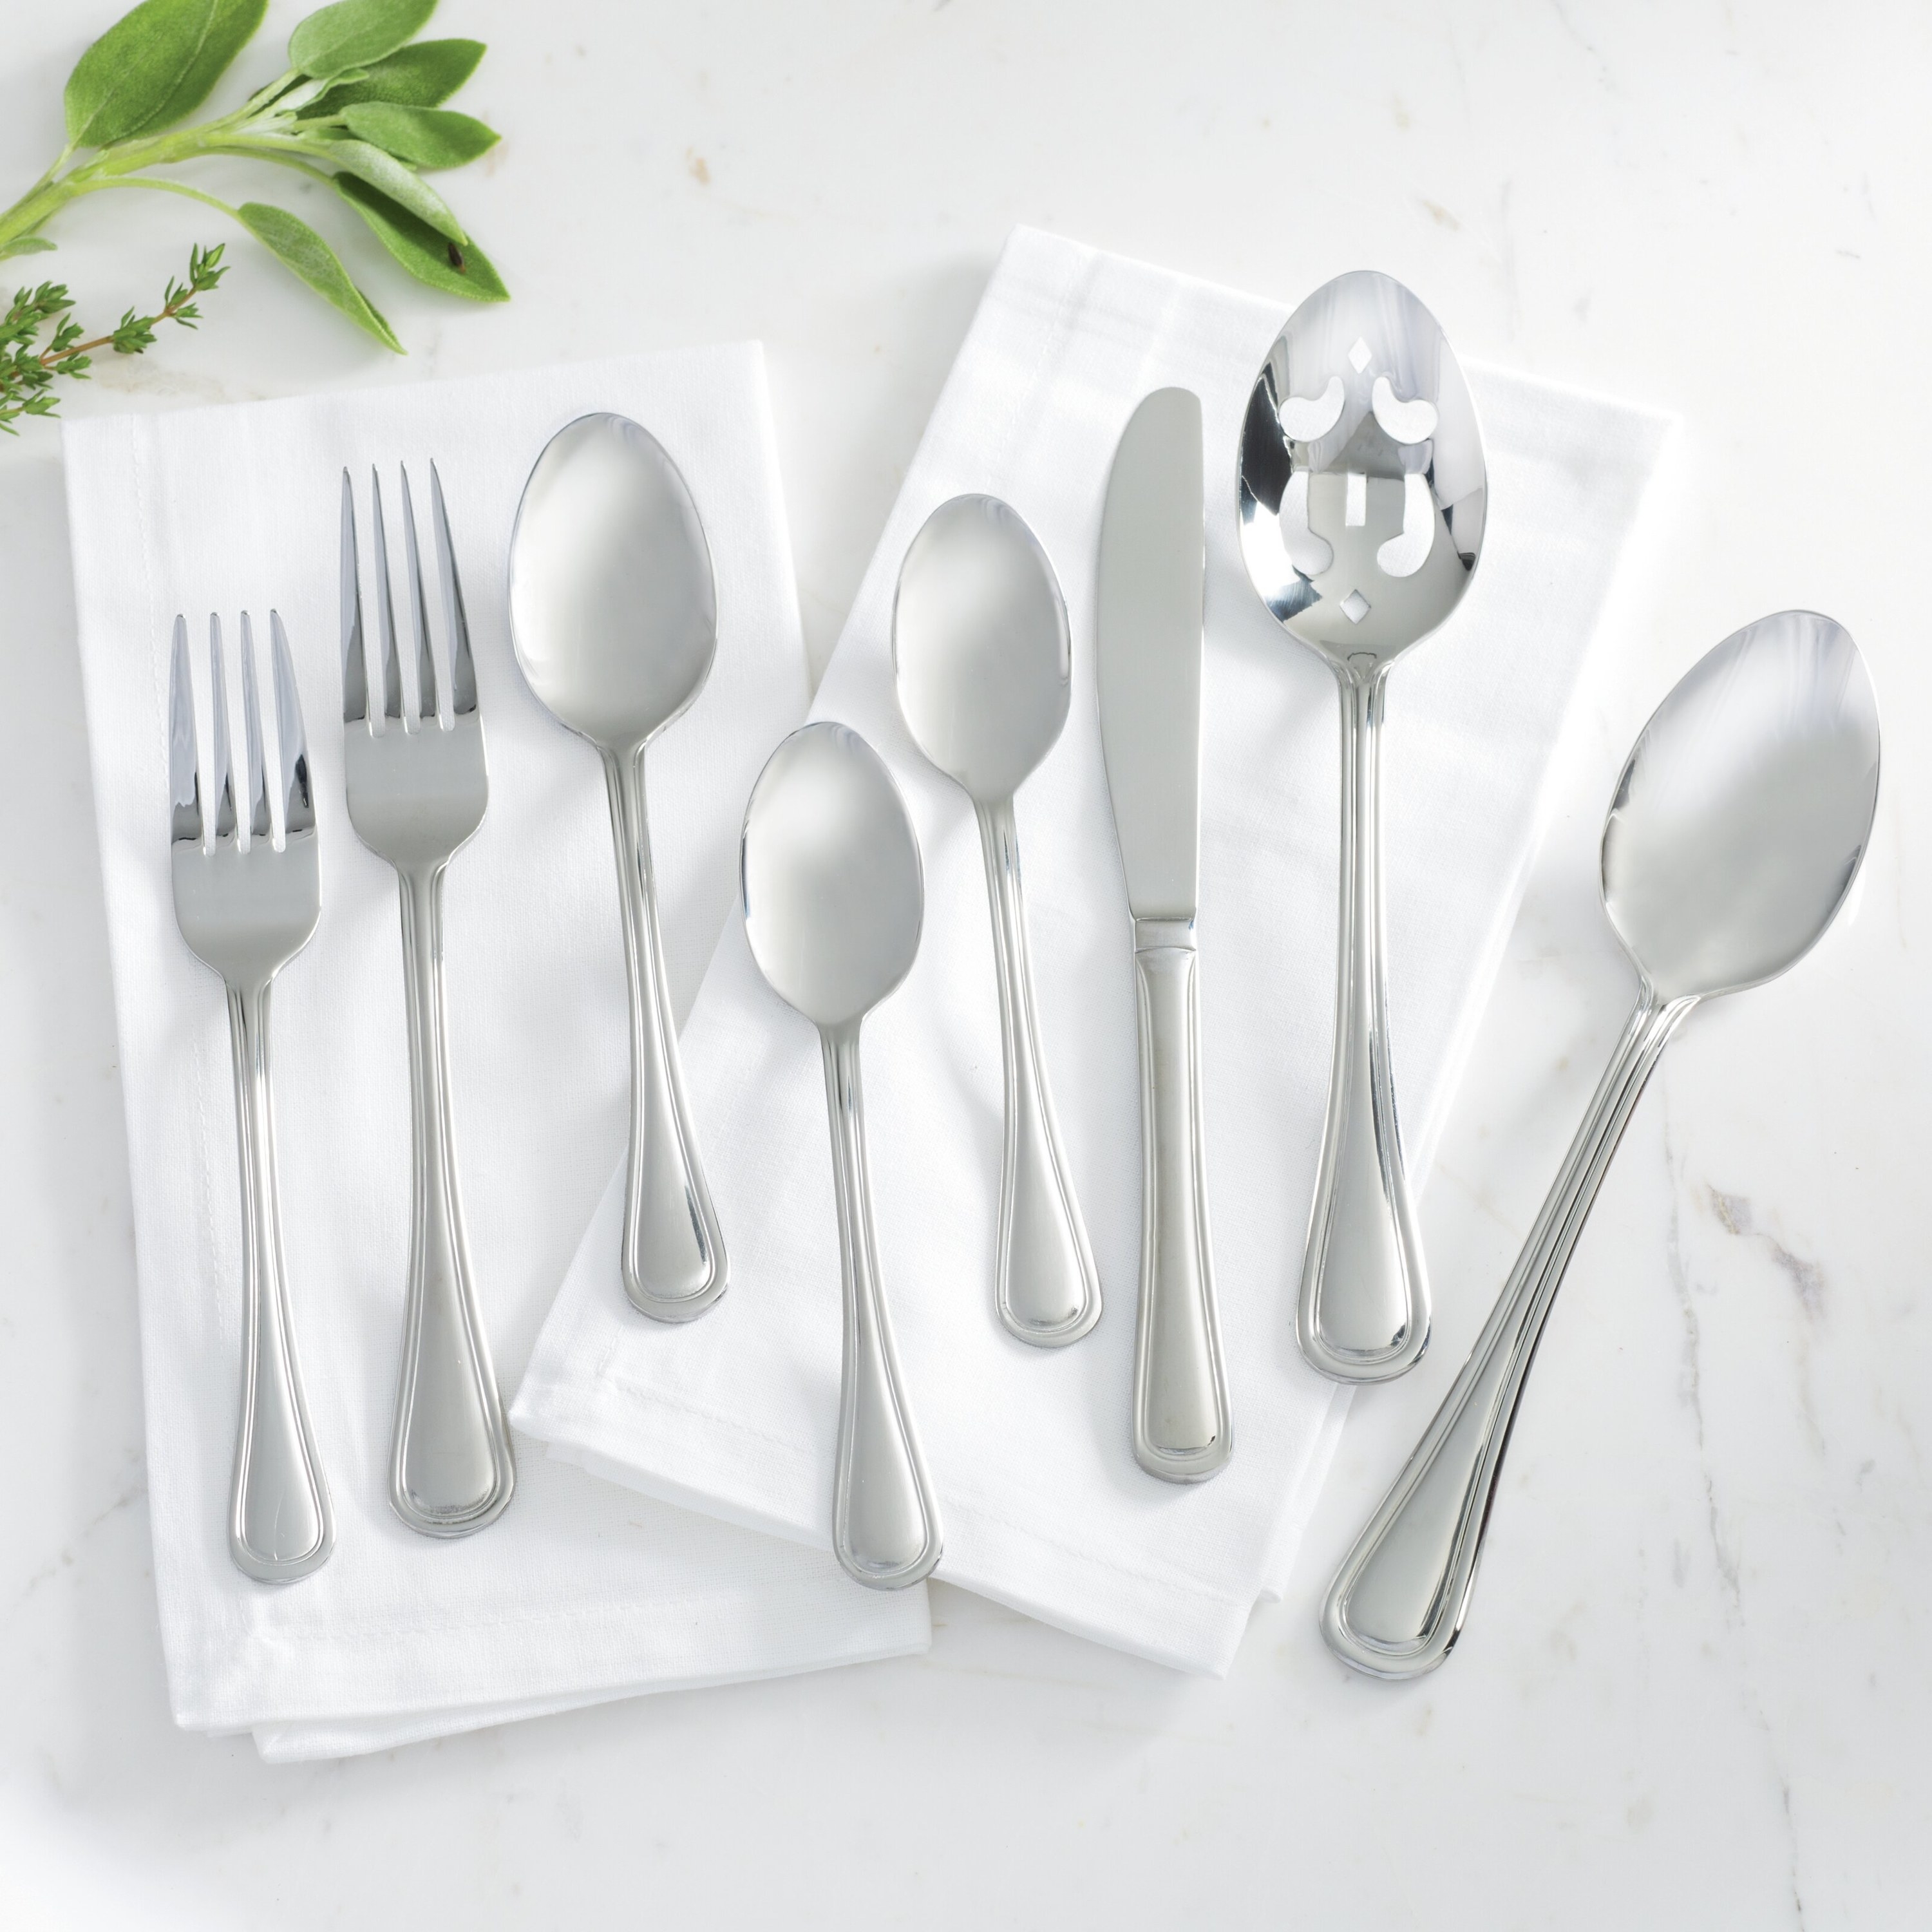 one of each of the forks, knives, and spoons in the set against two white napkins